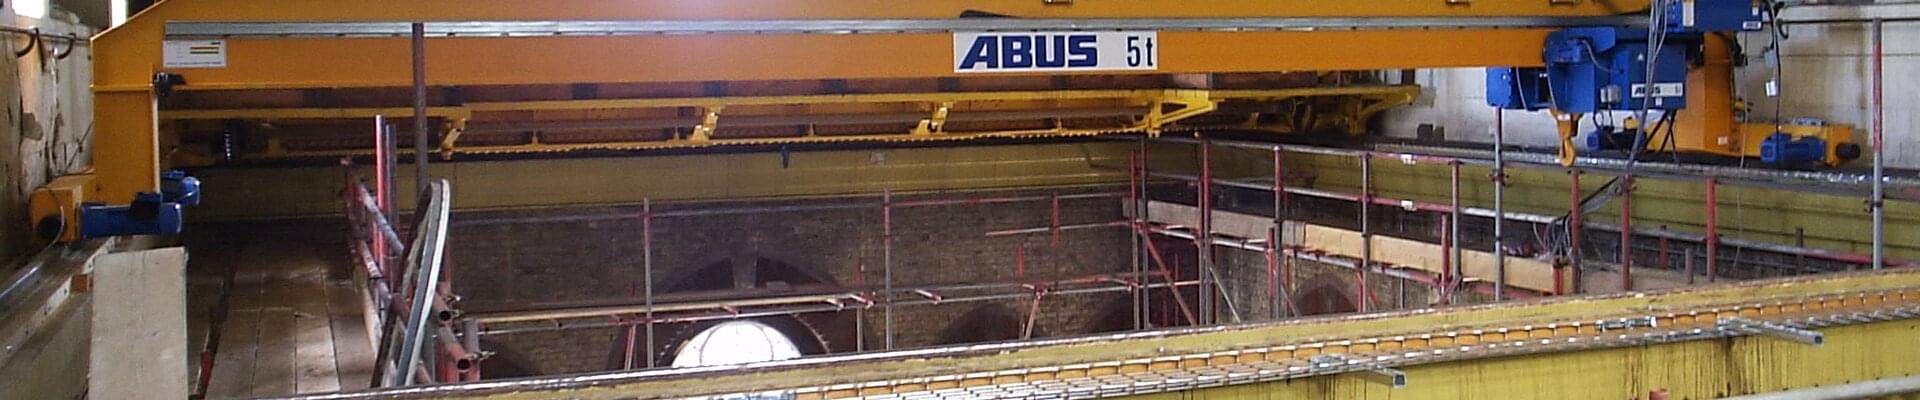 ABUS single girder overhead travelling crane with monorail trolley type E